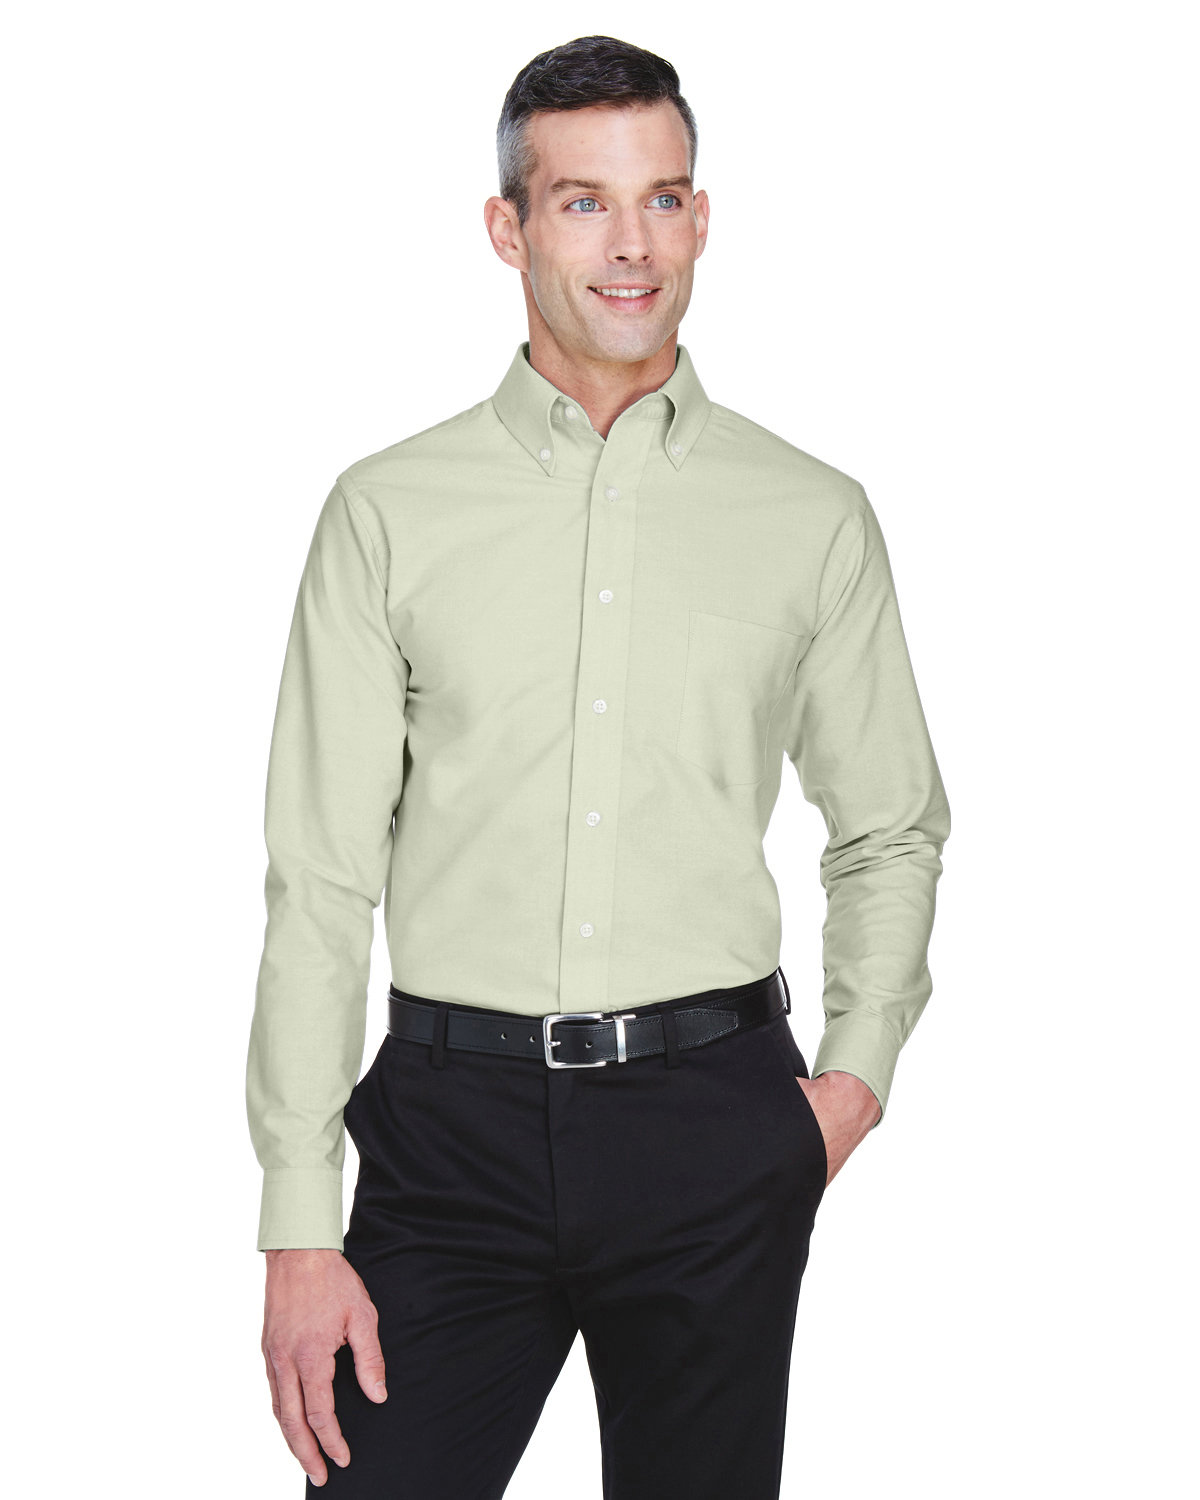 UltraClub Men's Classic Wrinkle-Resistant Long-Sleeve Oxford LIME 